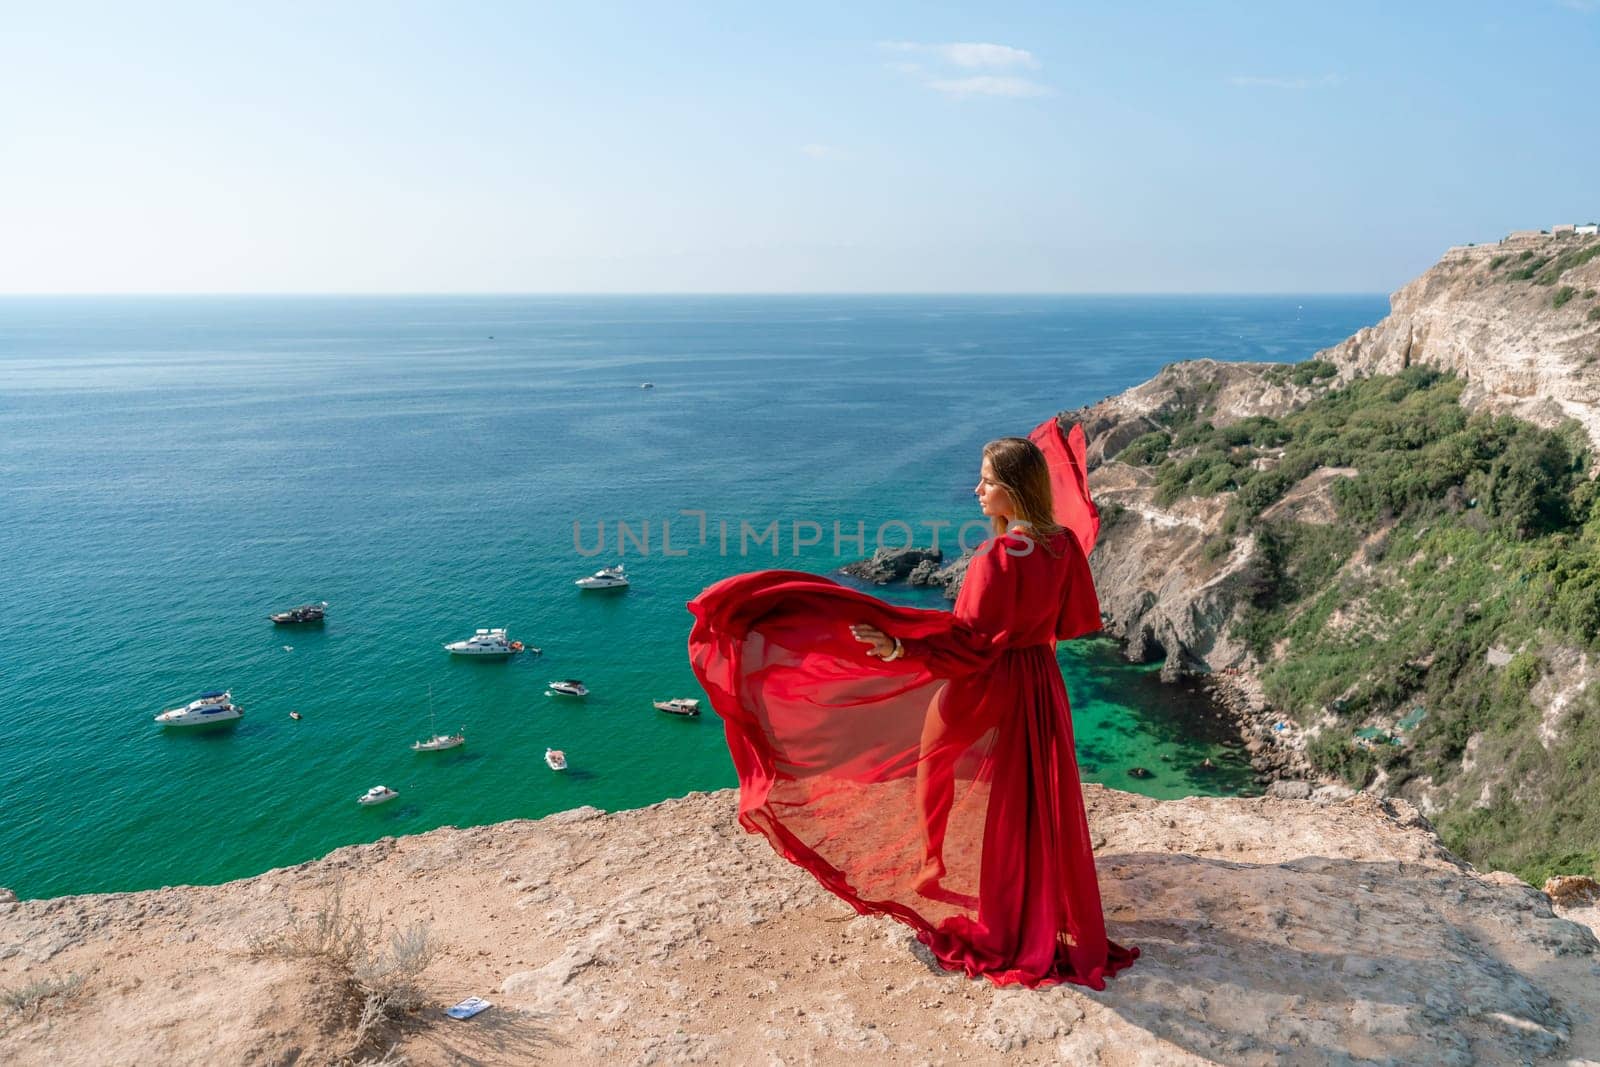 Red Dress Woman sea Cliff. A beautiful woman in a red dress and white swimsuit poses on a cliff overlooking the sea on a sunny day. Boats and yachts dot the background. by Matiunina